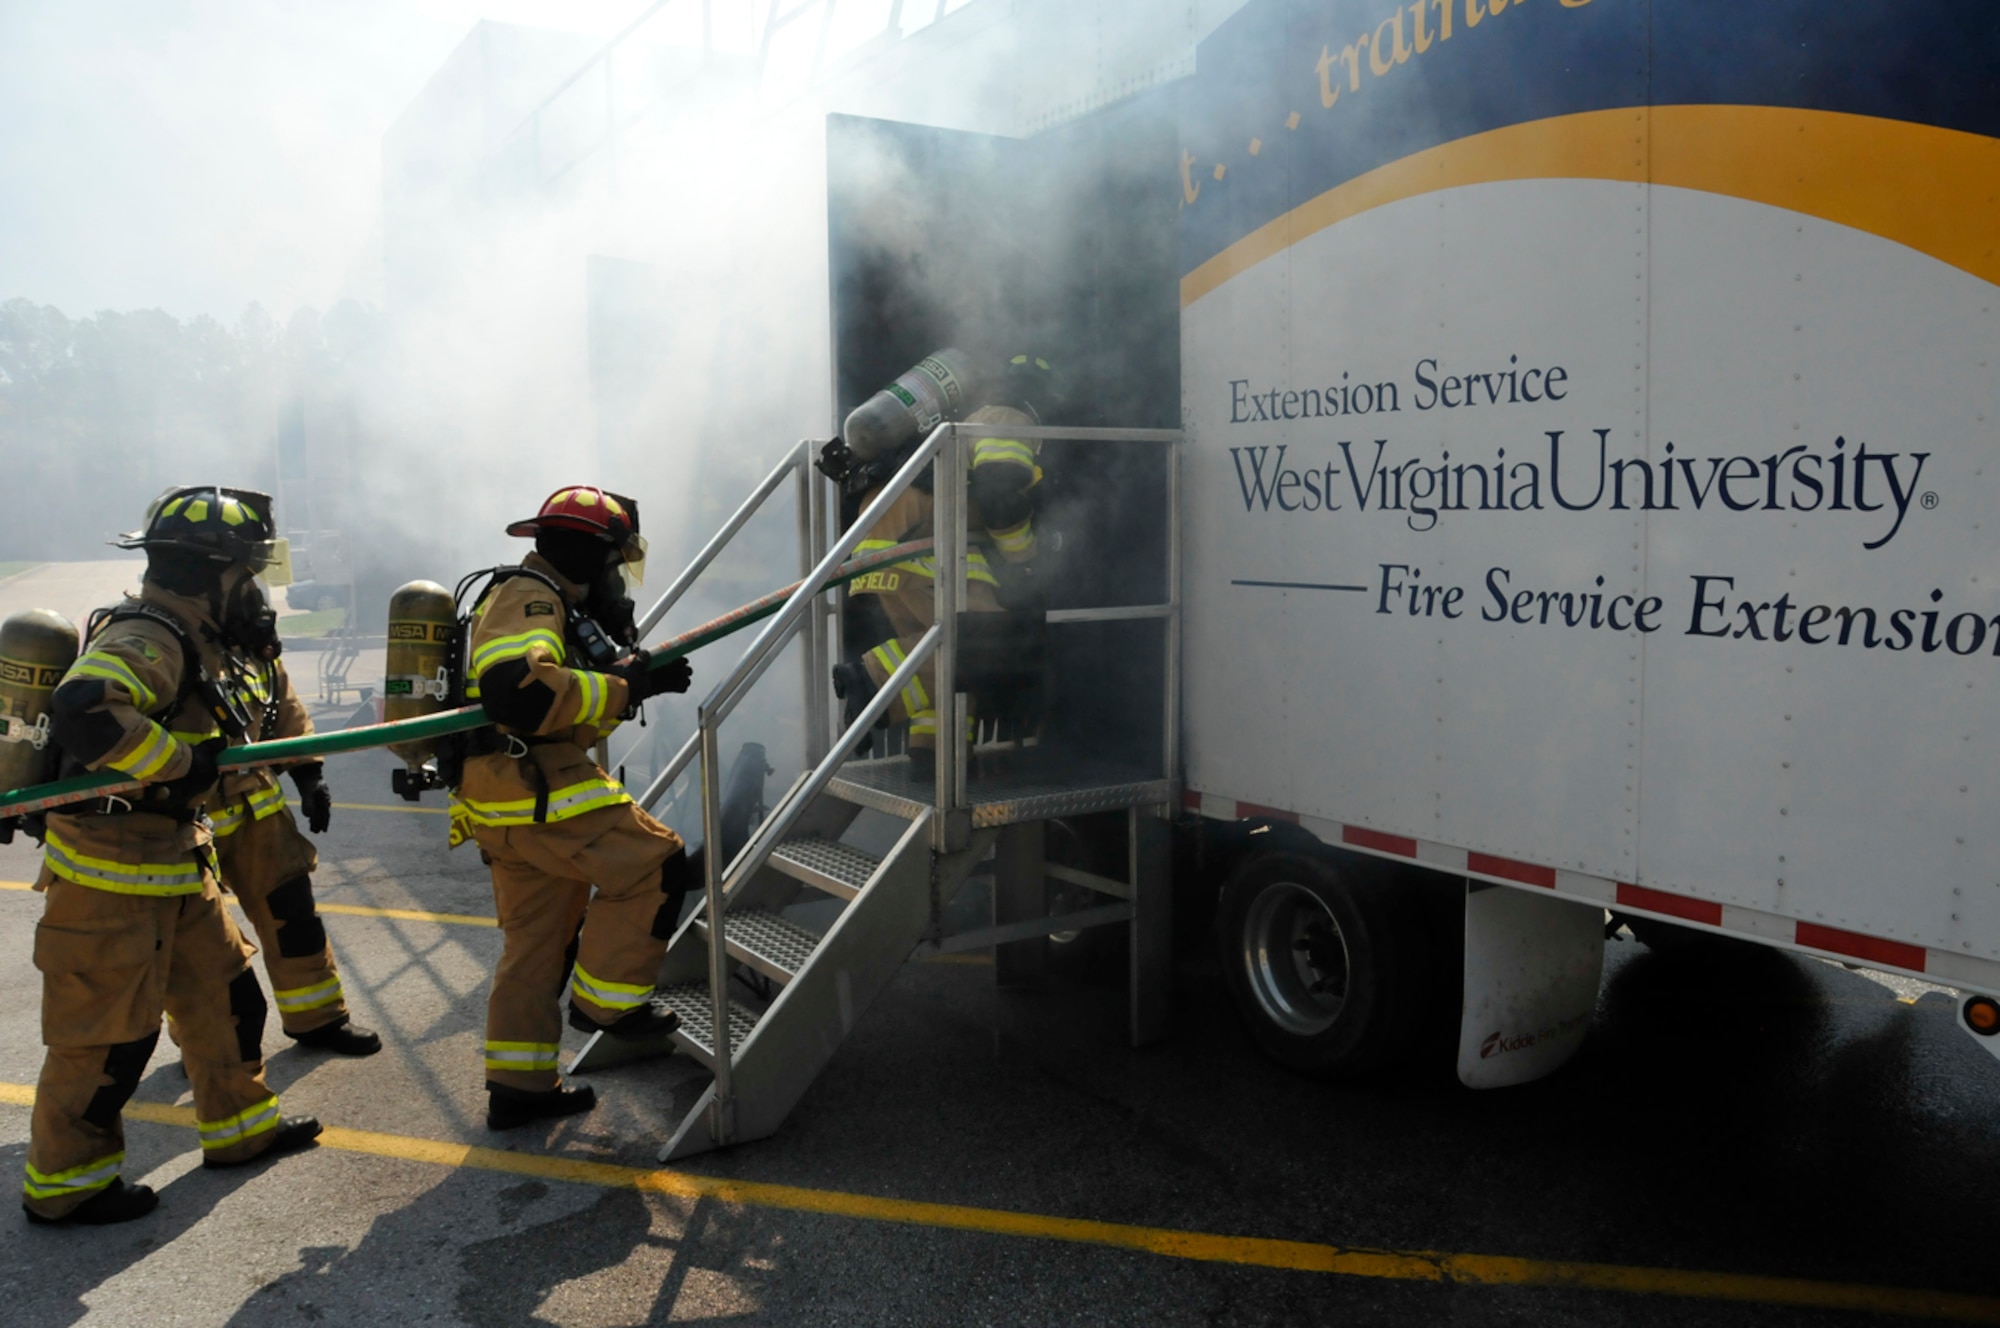 AEDC firefighters prepare to enter a smoke-filled room and put out a simulated kitchen fire March 27. The training unit from West Virginia University can simulate fires on multiple floors and uses theatrical smoke. (Photo by Rick Goodfriend)